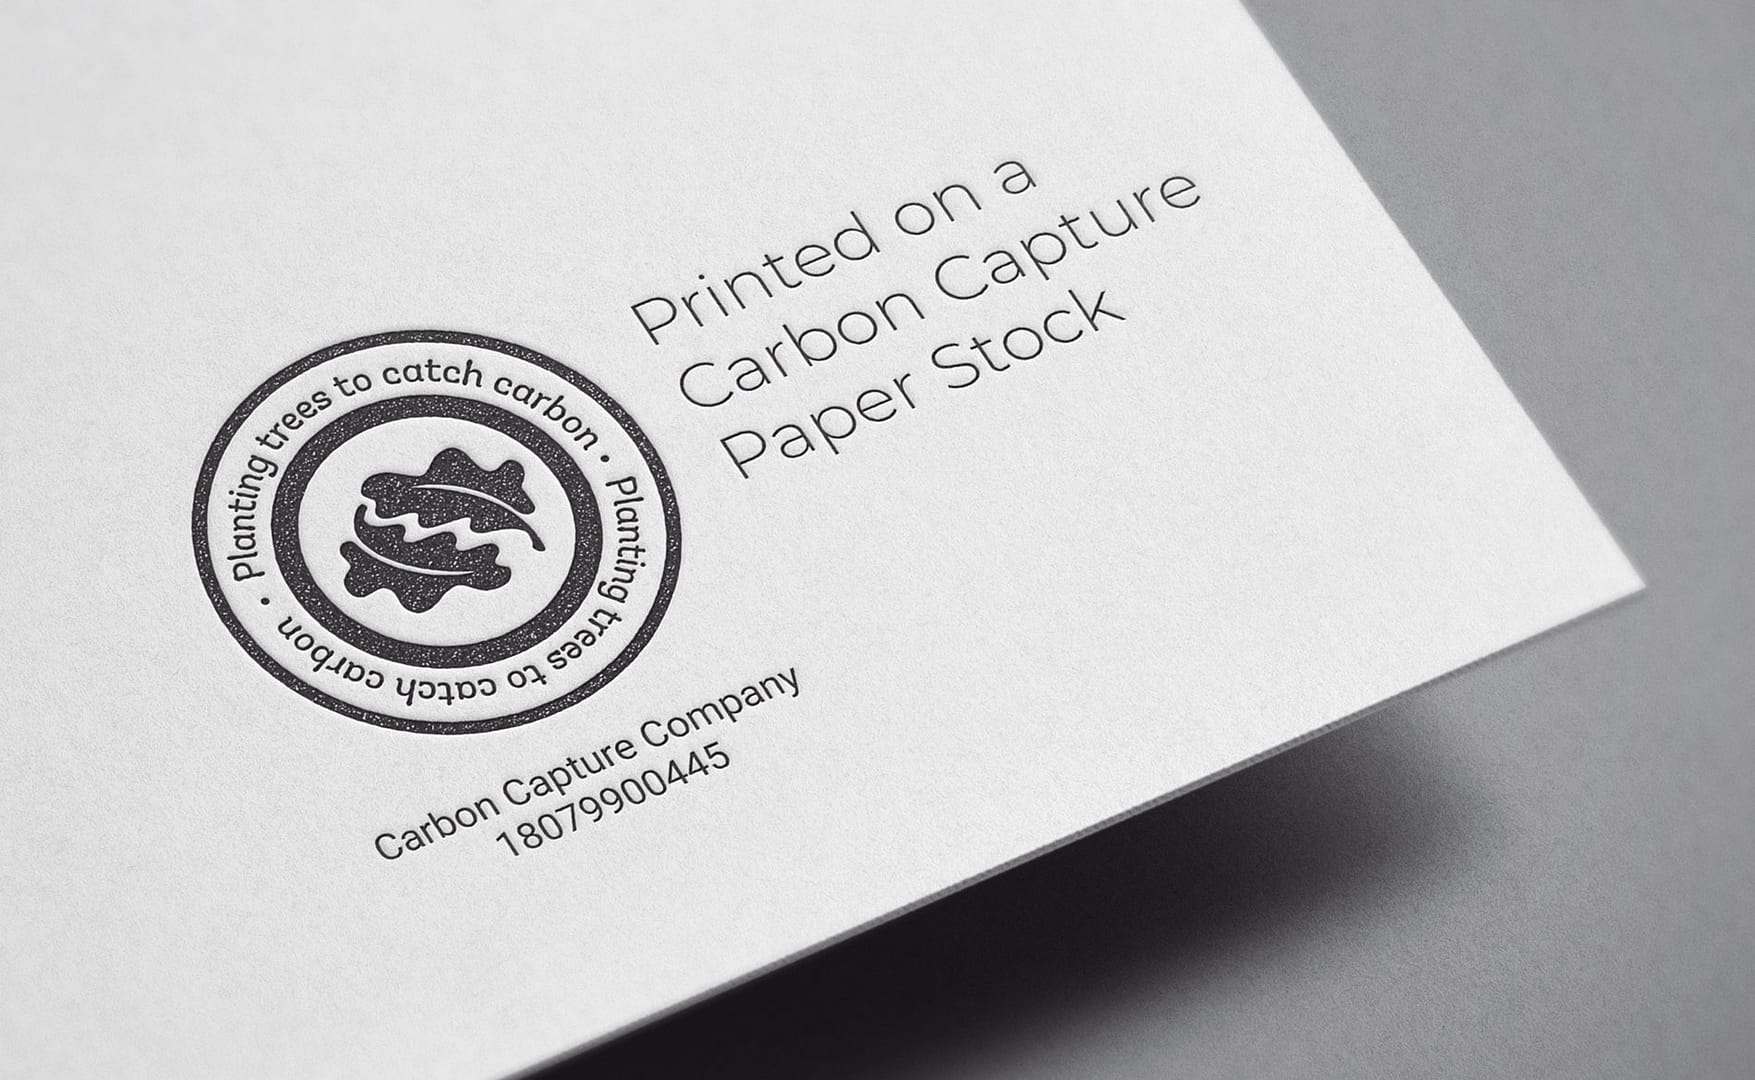 Sherwin Rivers Printers Ltd - Stoke-on-Trent, Staffordshire, Displaying Carbon Capture on your Print Runs